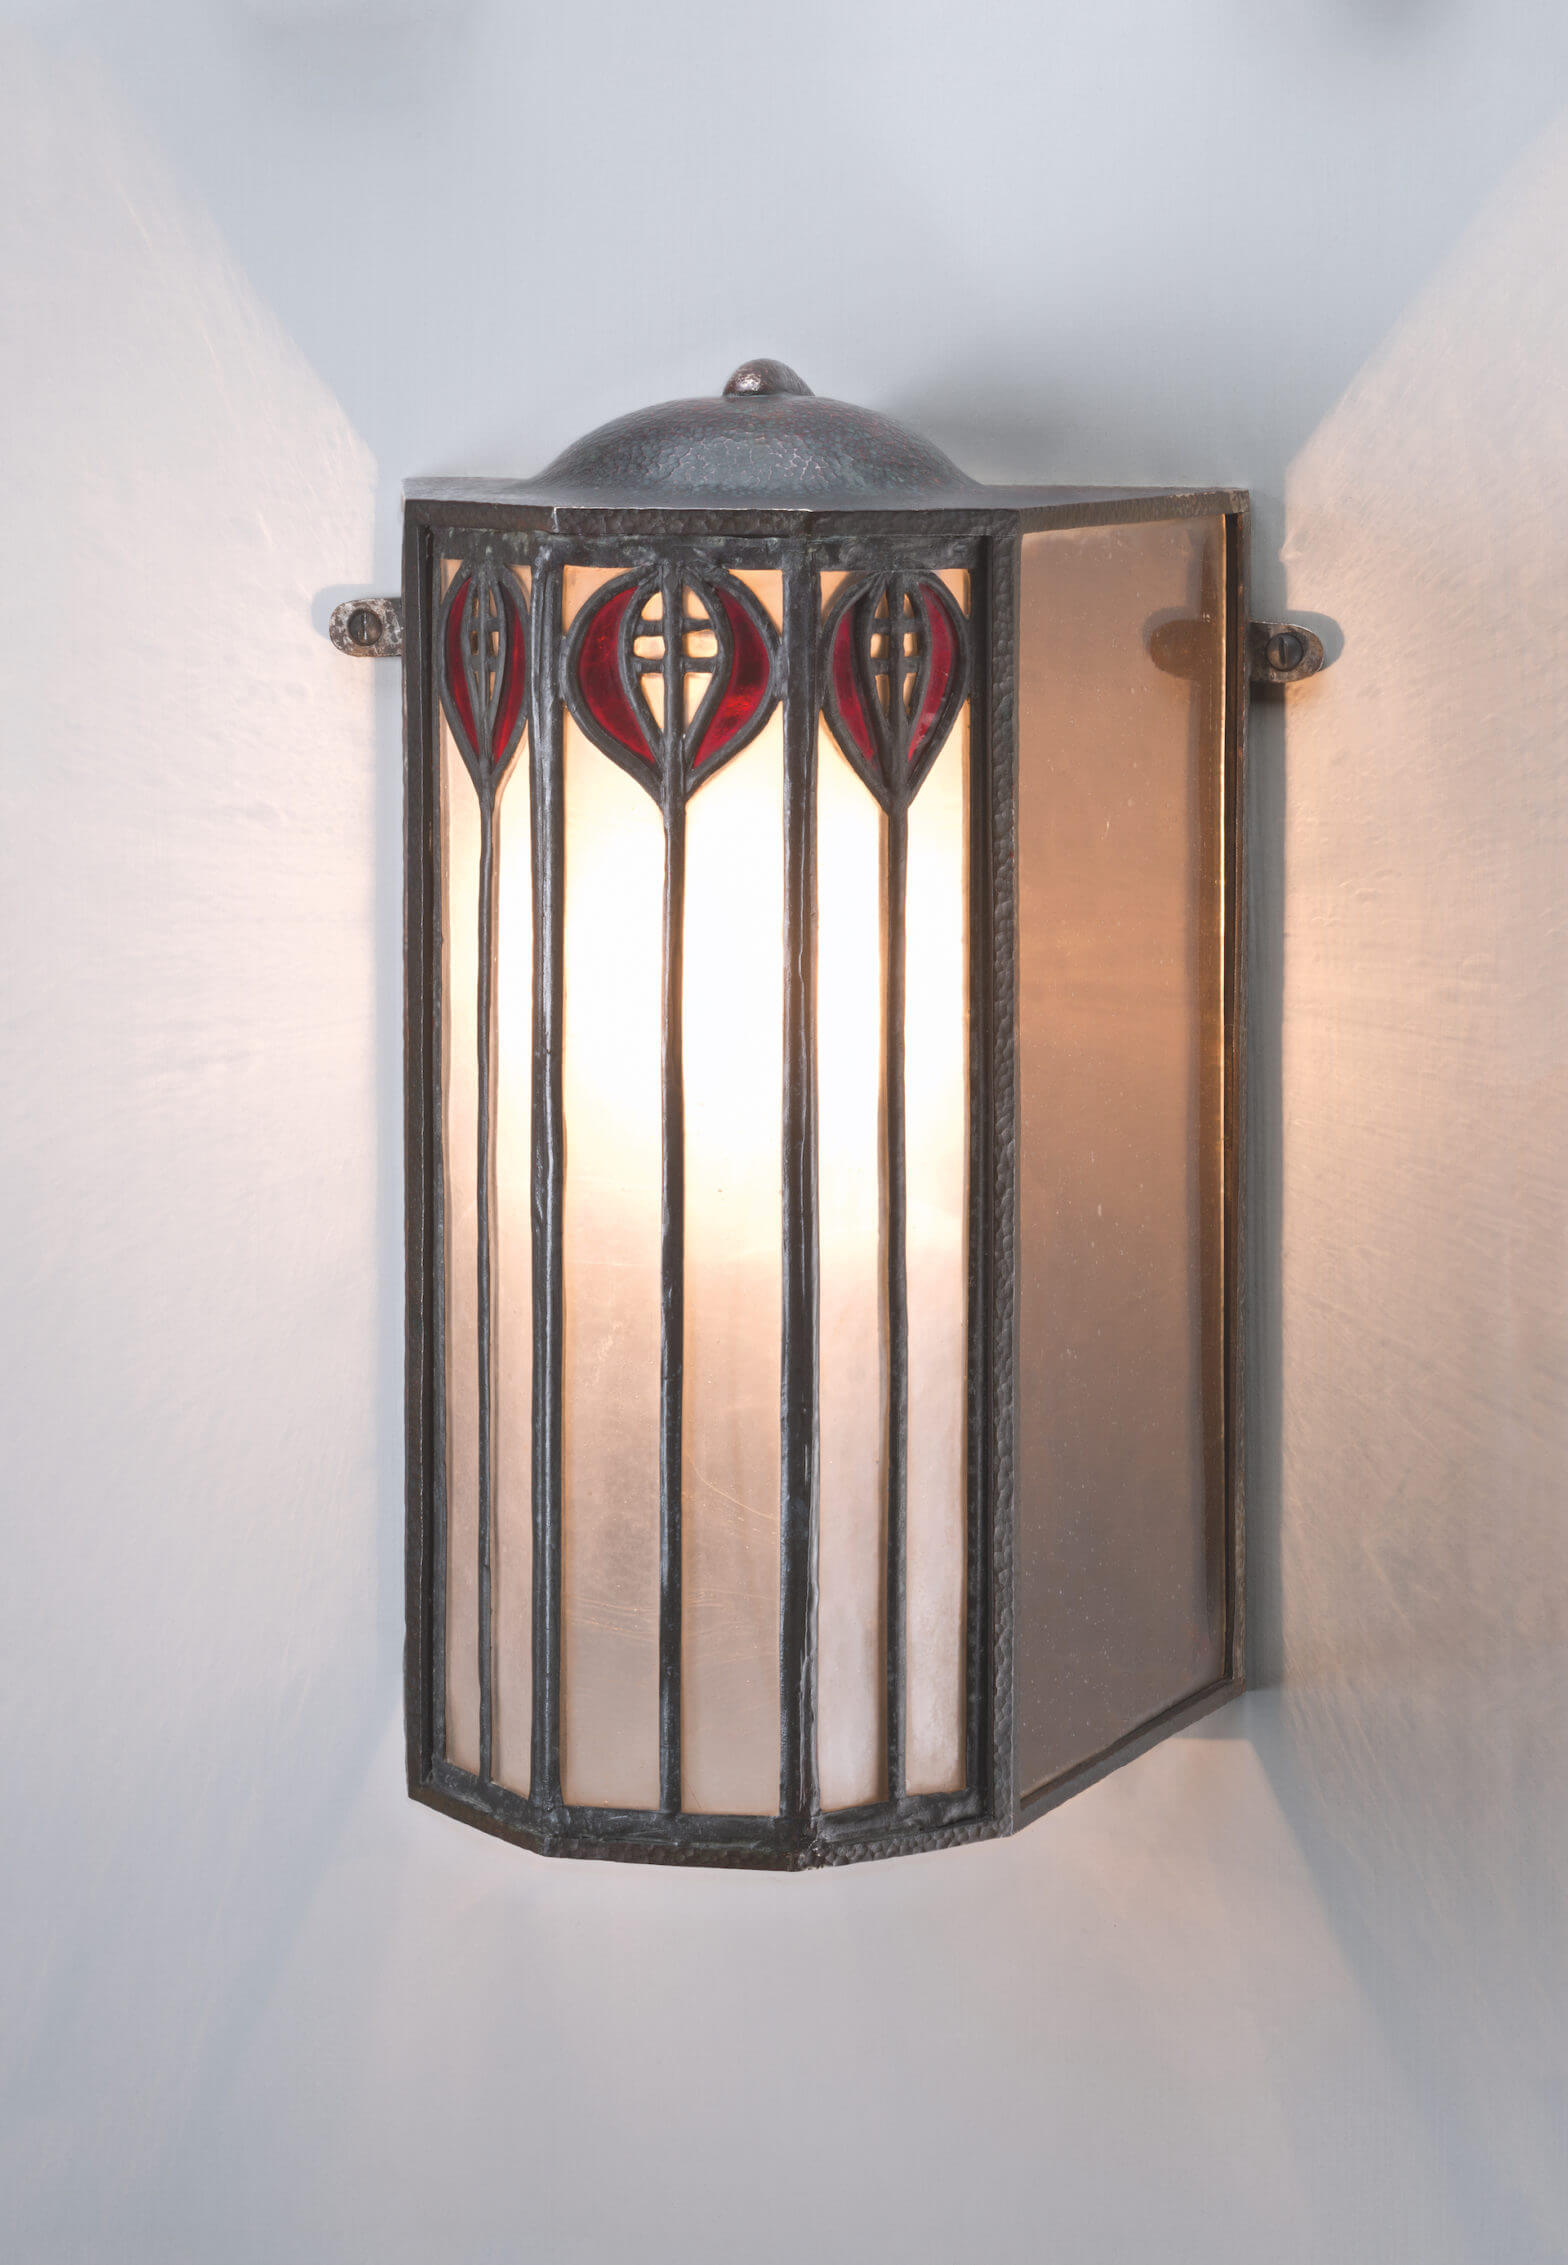 Josef Hoffmann - Sconce for the Hochreit Hunting Lodge